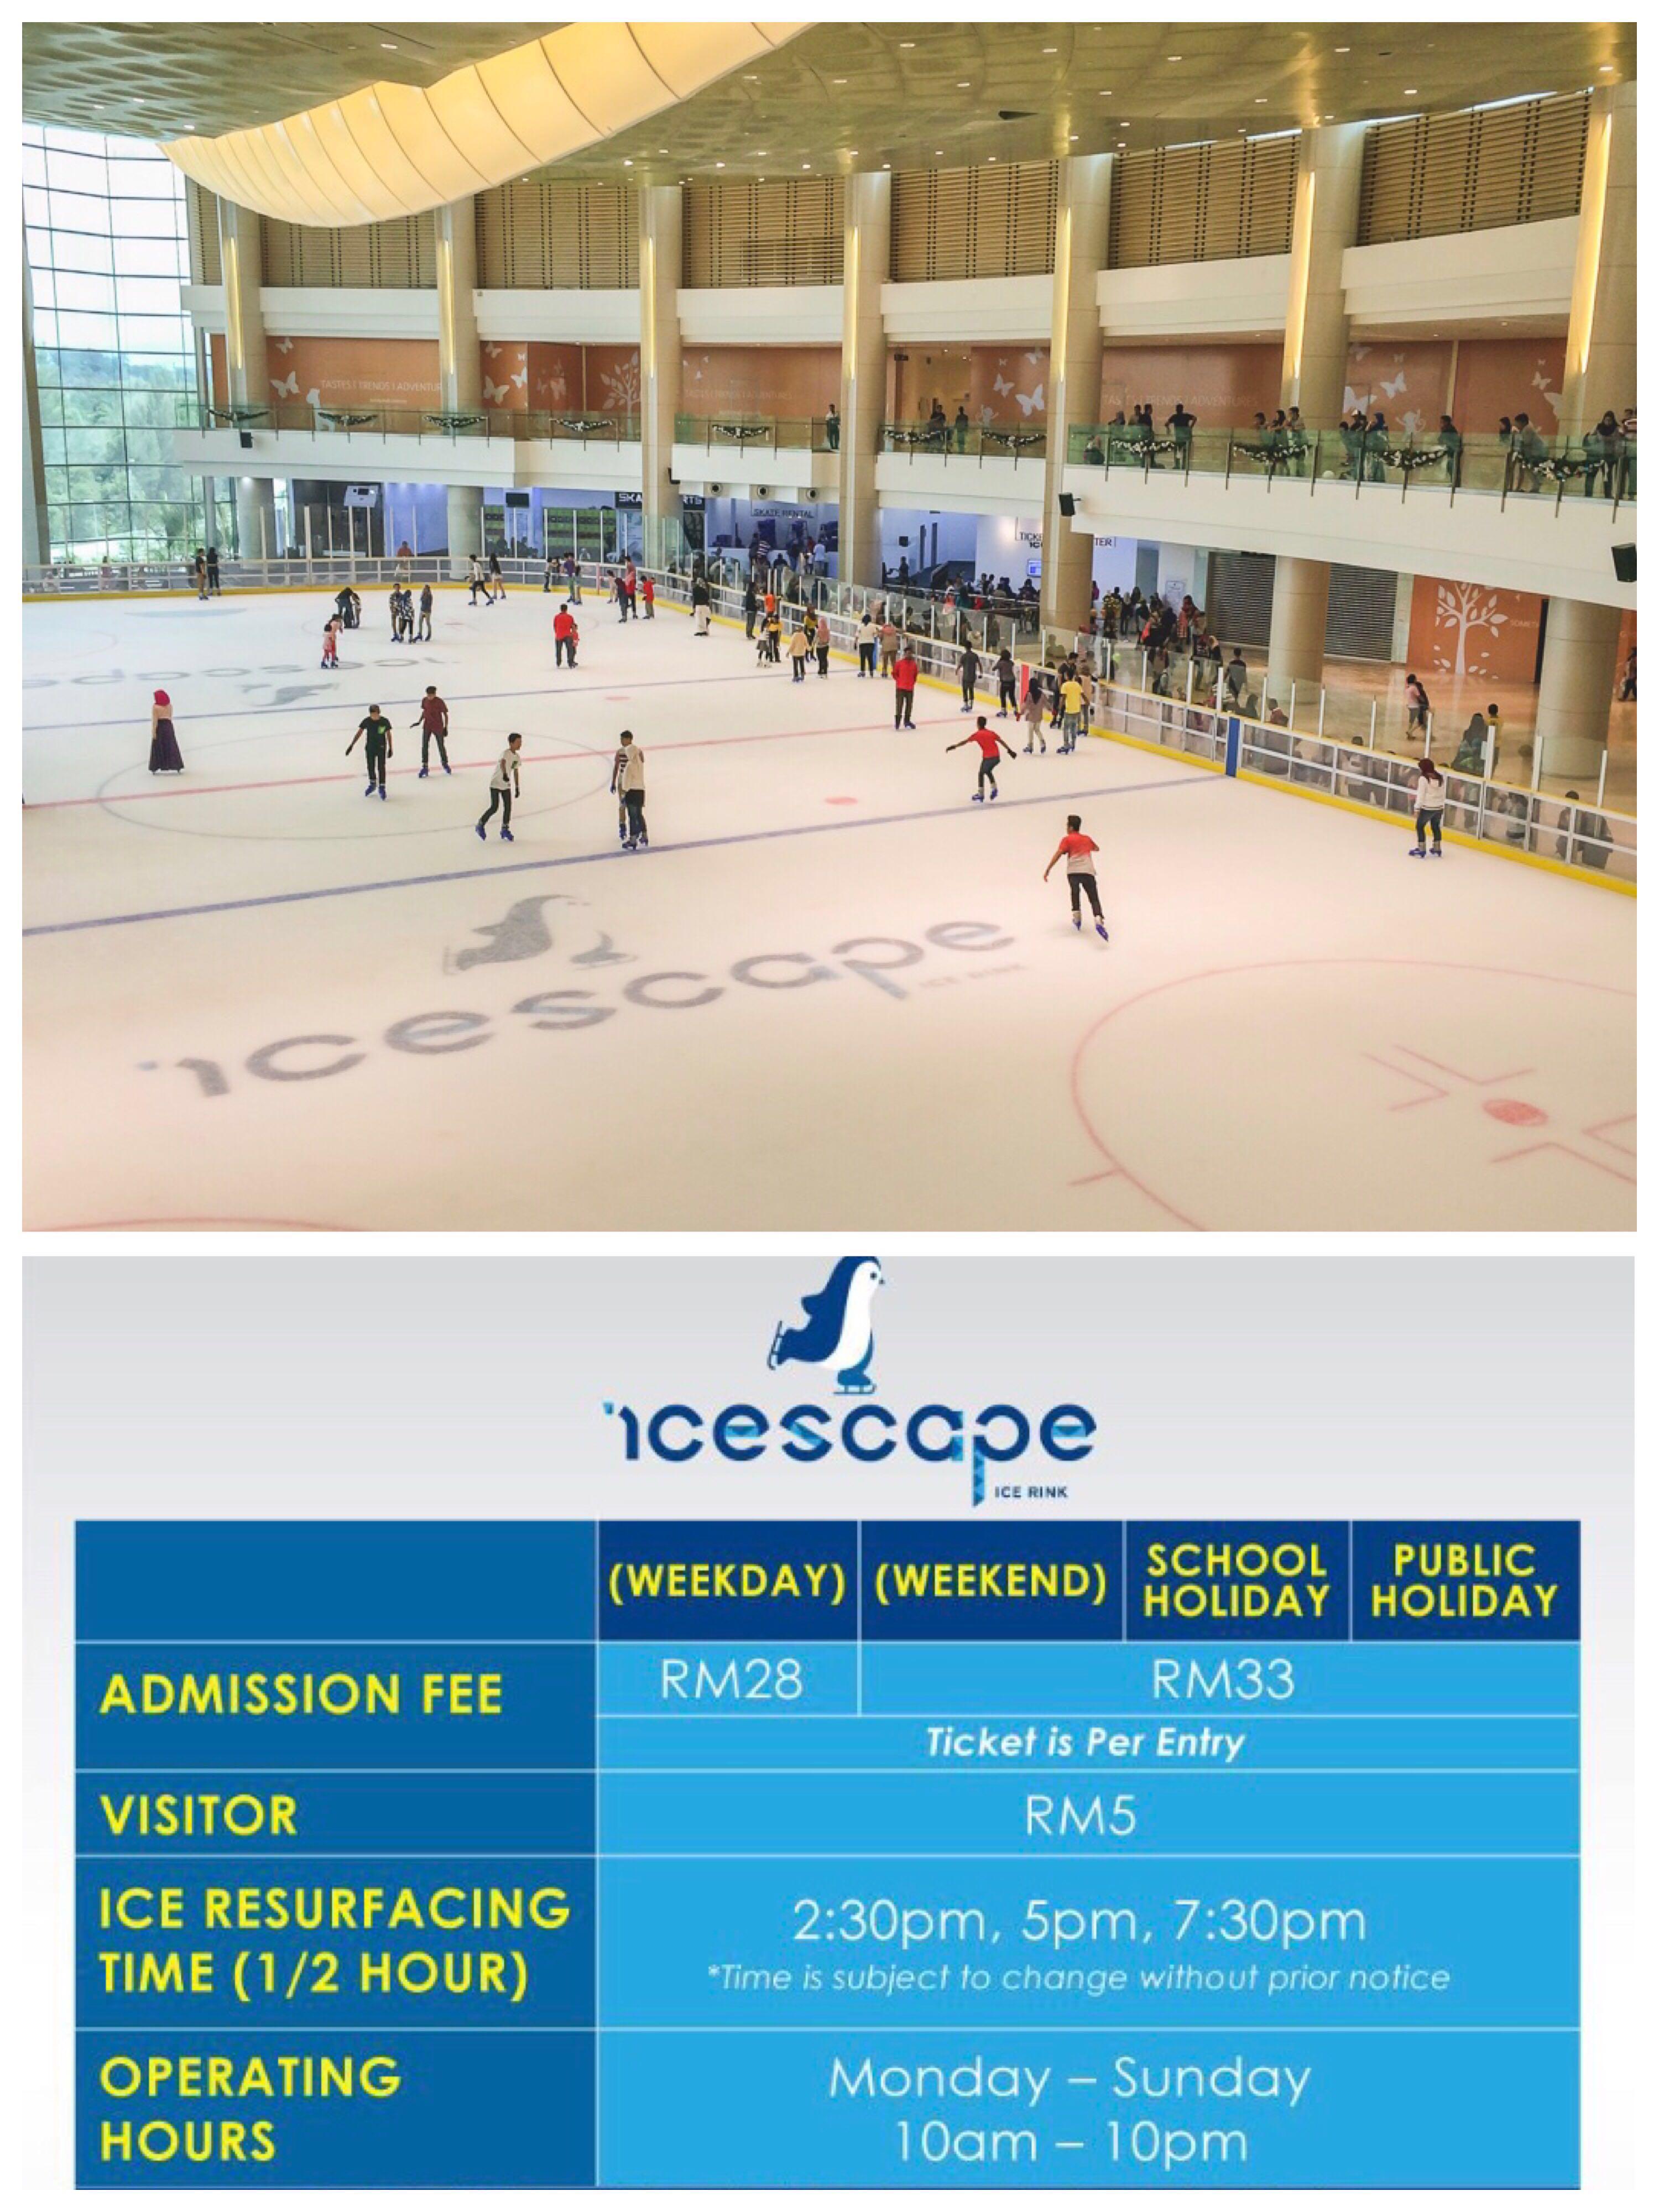 Icescape Ice Skating Ticket At Ioi City Mall Putrajaya Tickets Vouchers Gift Cards Vouchers On Carousell